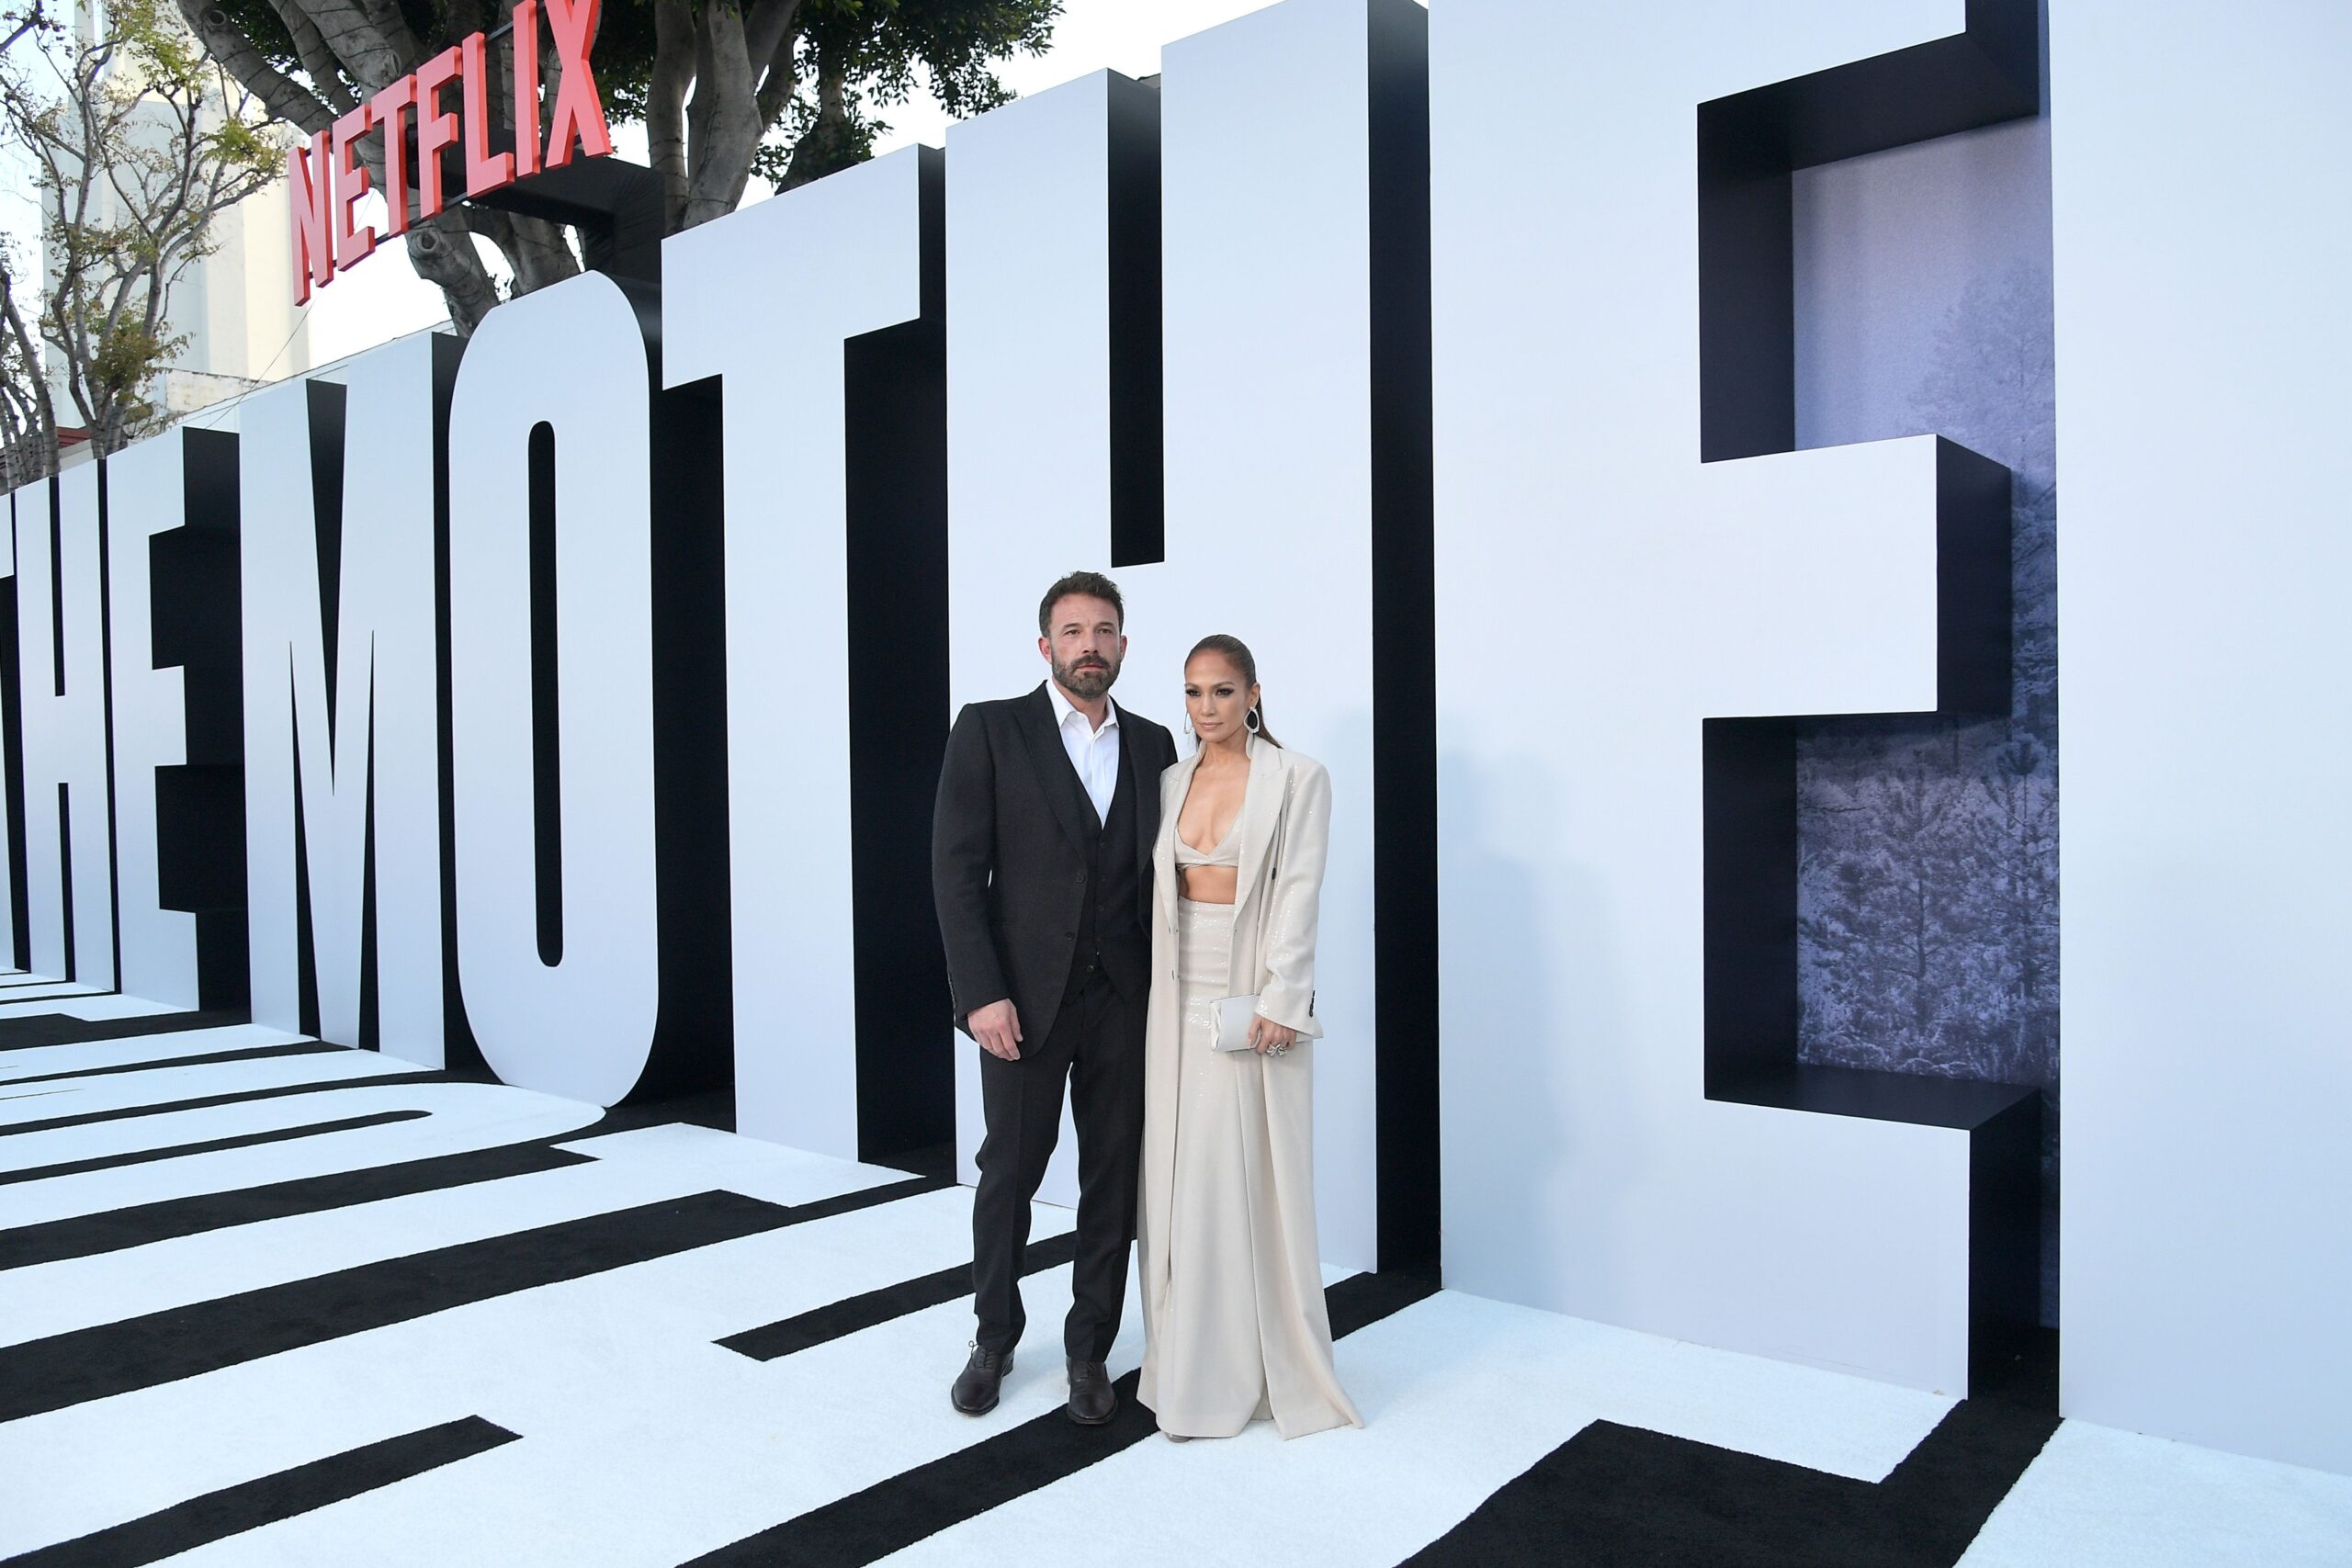 LOS ANGELES, CALIFORNIA - MAY 10: (L-R) Ben Affleck and Jennifer Lopez attend "The Mother" Los Angeles Premiere Event at Westwood Village on May 10, 2023 in Los Angeles, California. (Photo by Charley Gallay/Getty Images for Netflix)